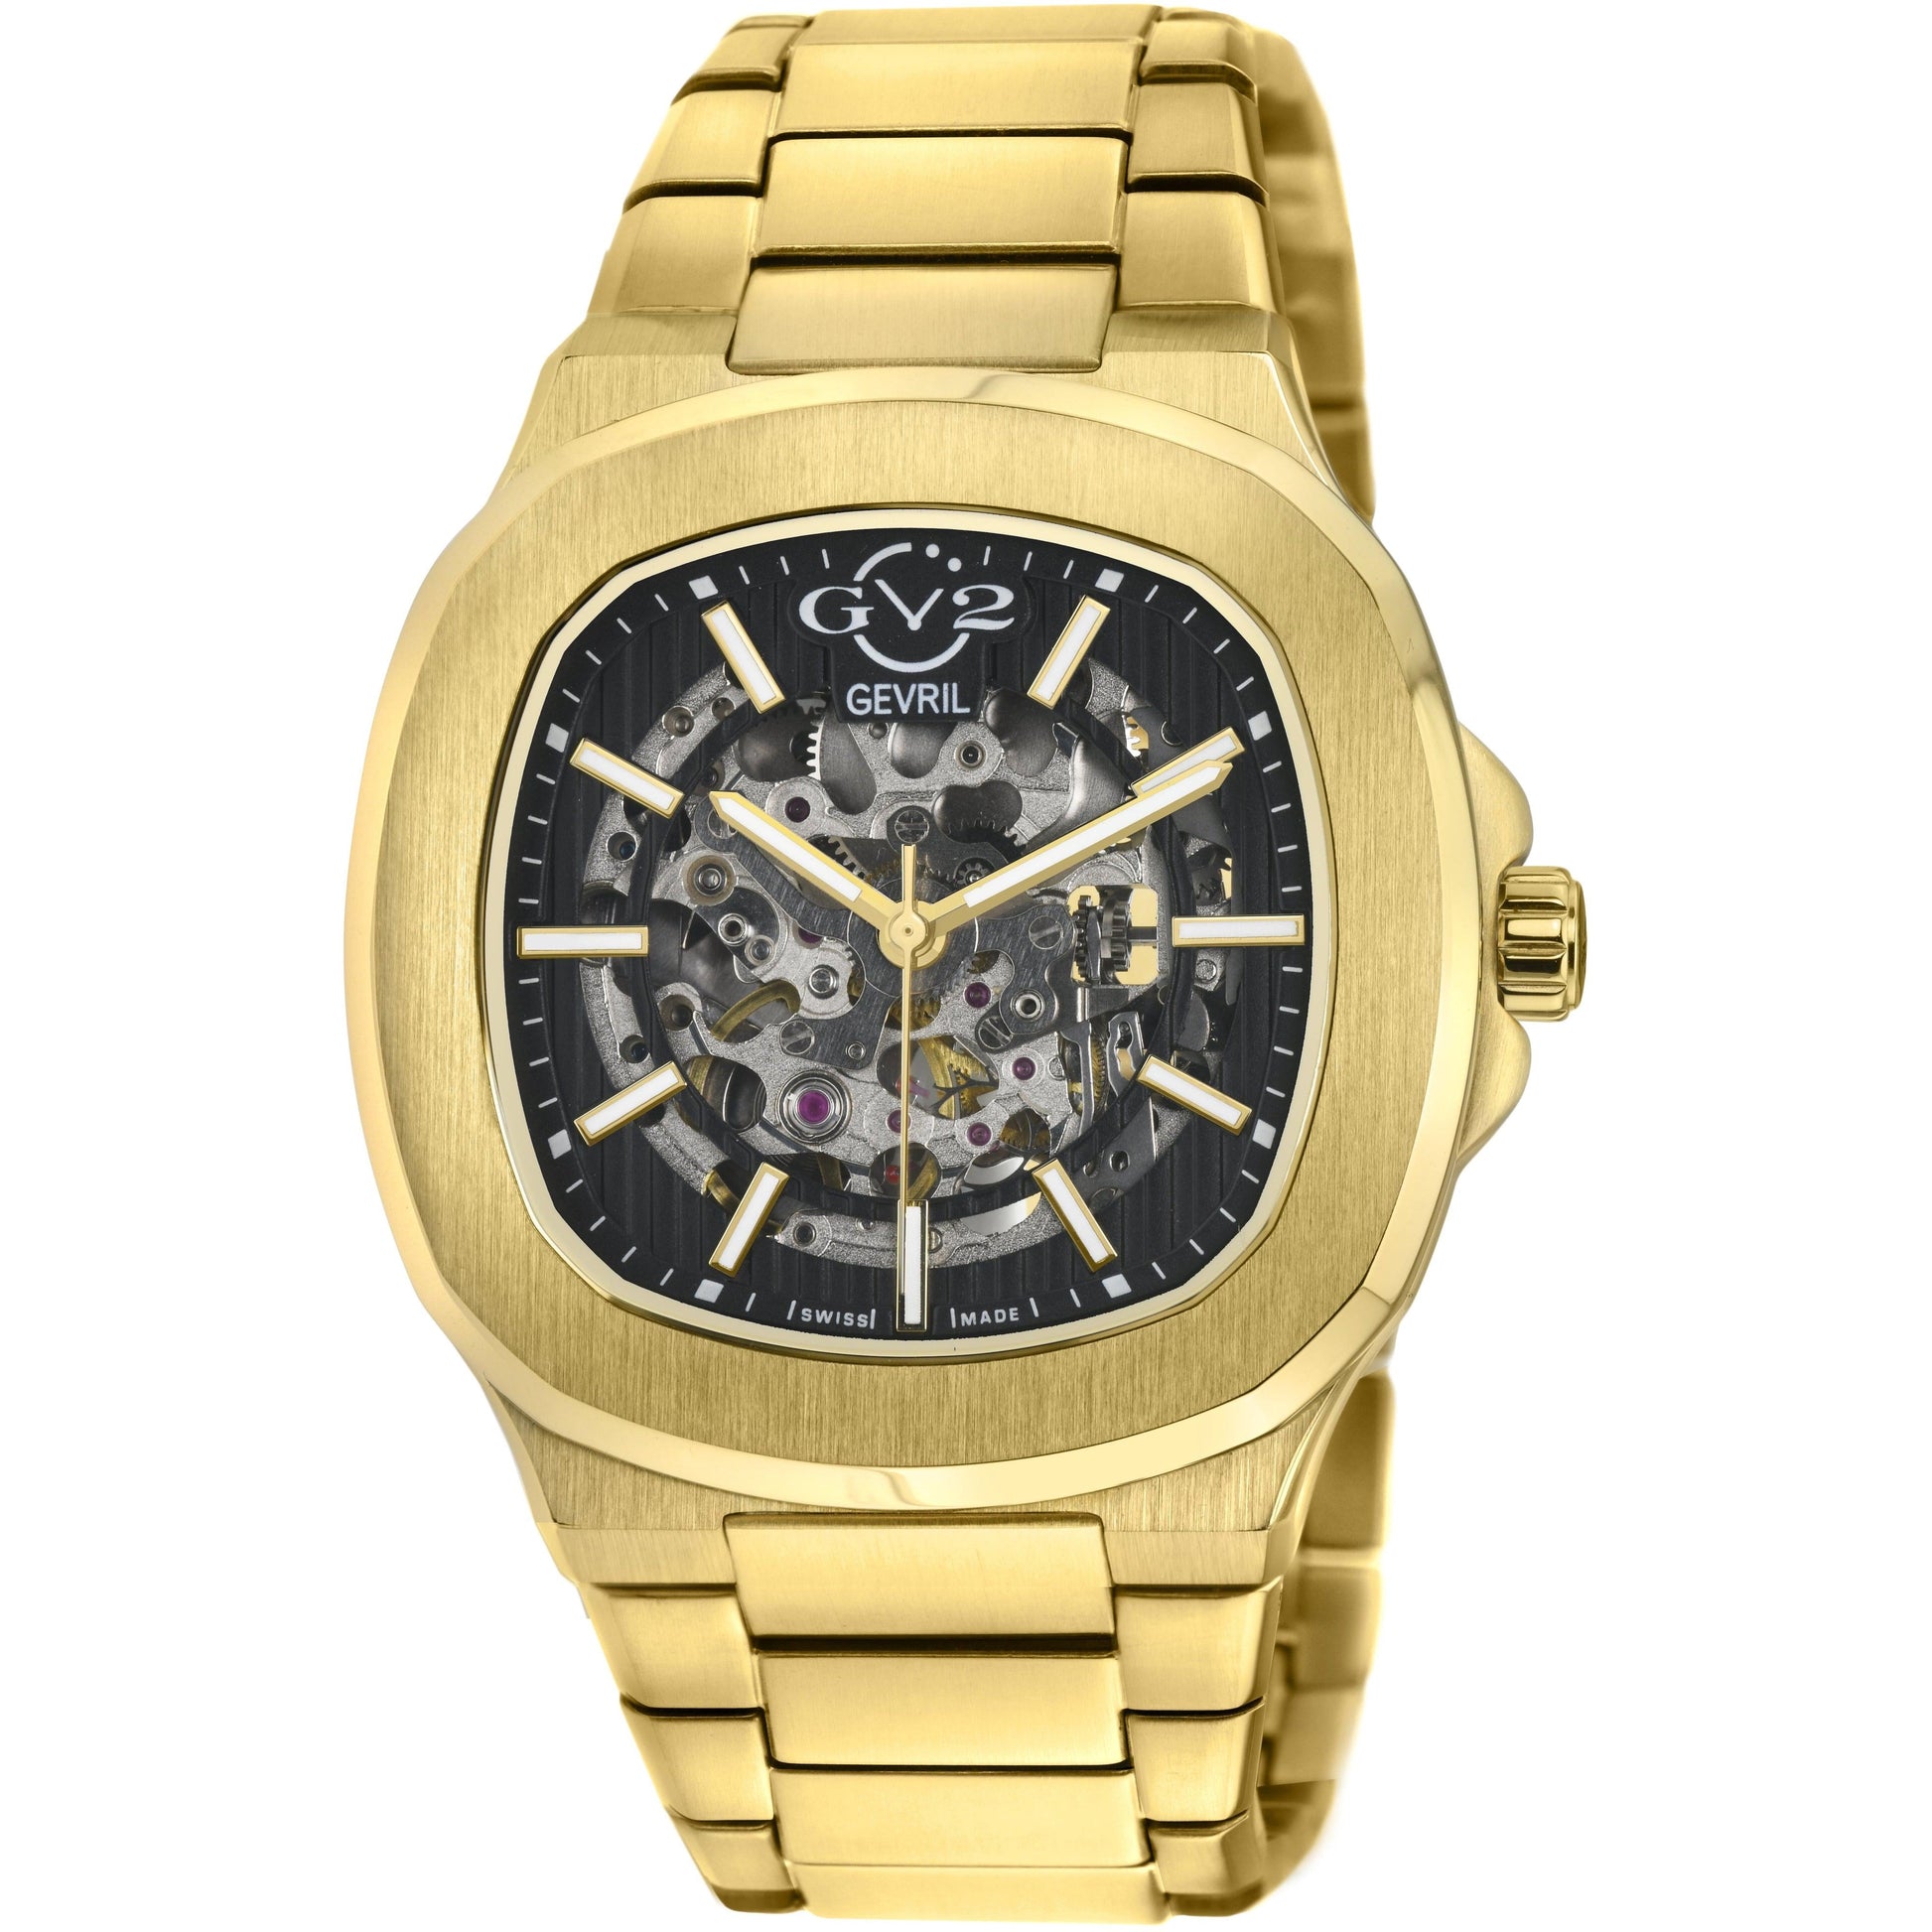 Gevril-Luxury-Swiss-Watches-GV2 Potente - Rugged - Skeleton-18115